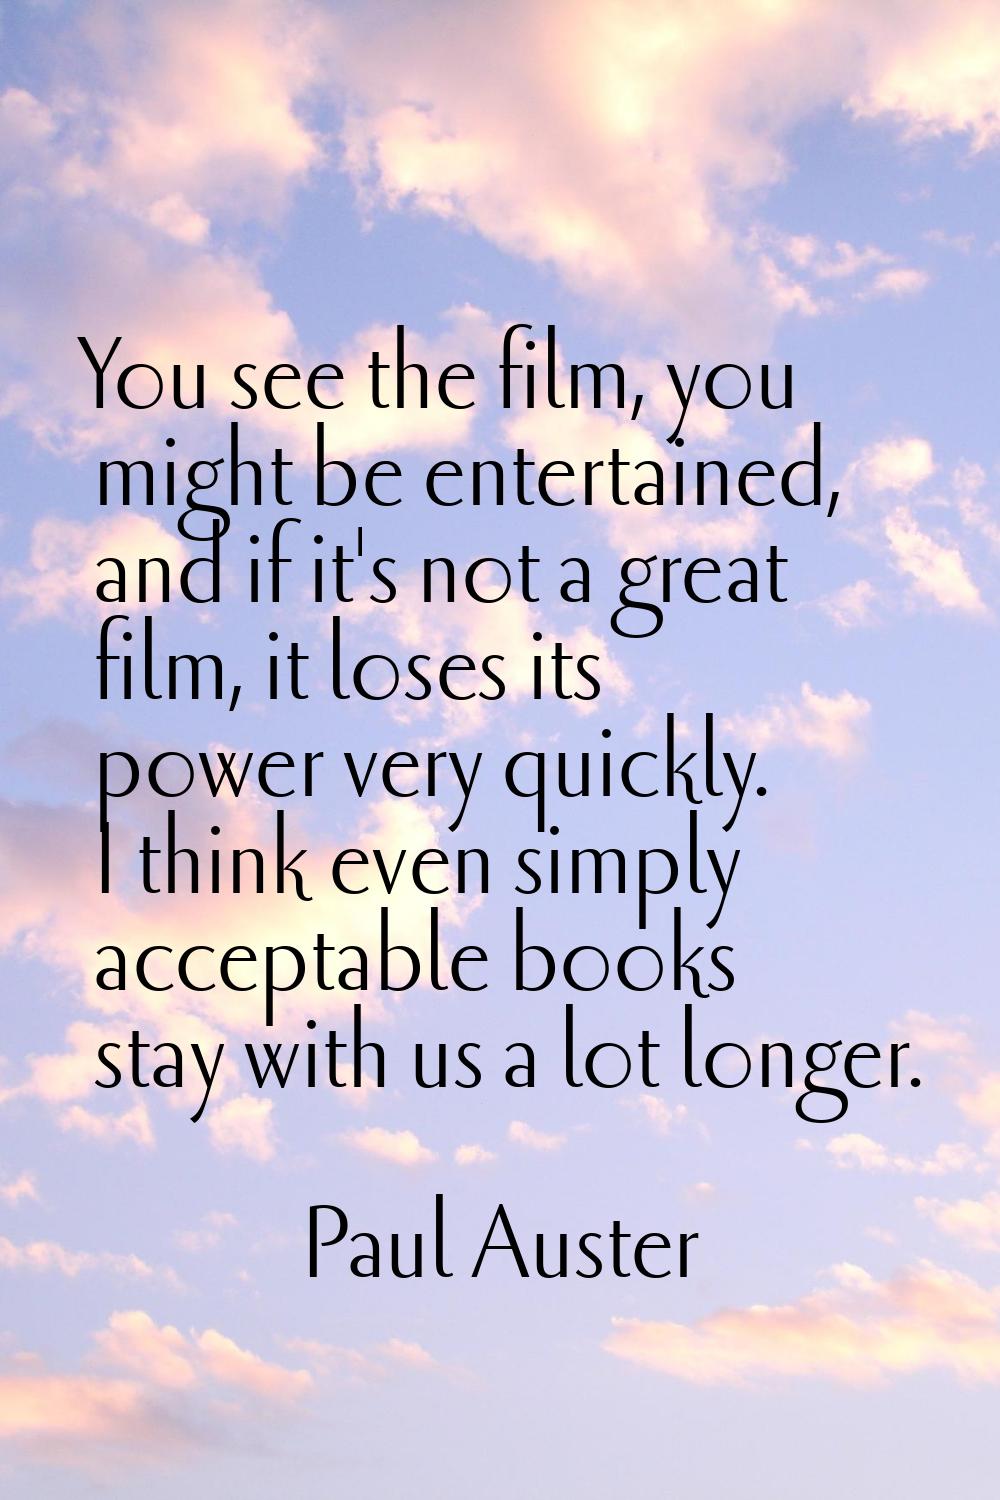 You see the film, you might be entertained, and if it's not a great film, it loses its power very q